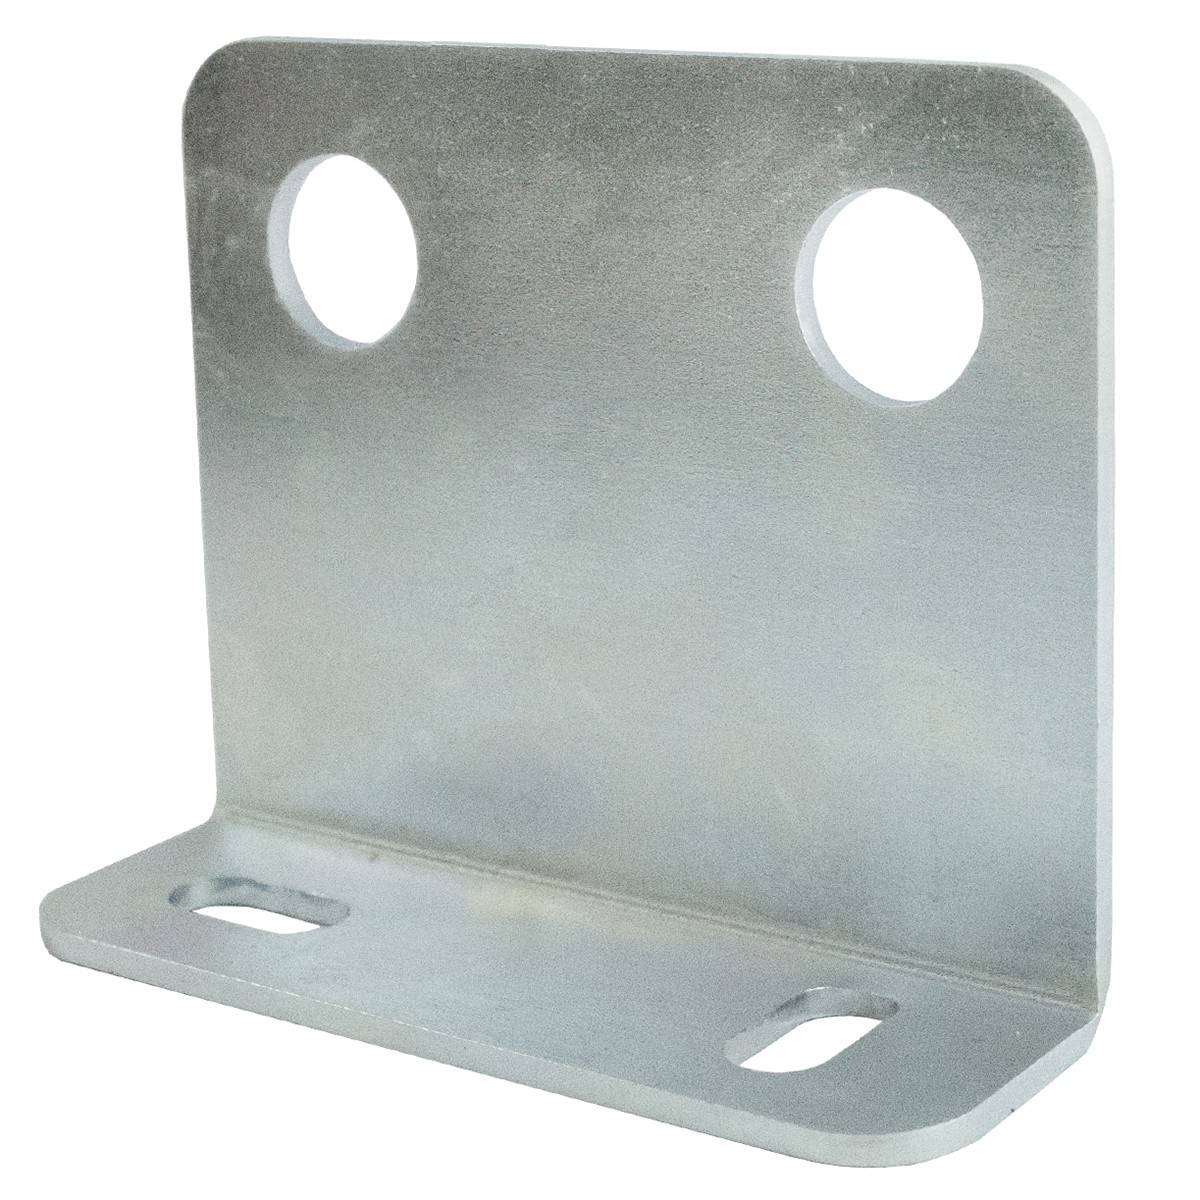 Table for mounting hydraulic sockets 100 x 82 mm, HIGH for 2 sockets - M18 / M16